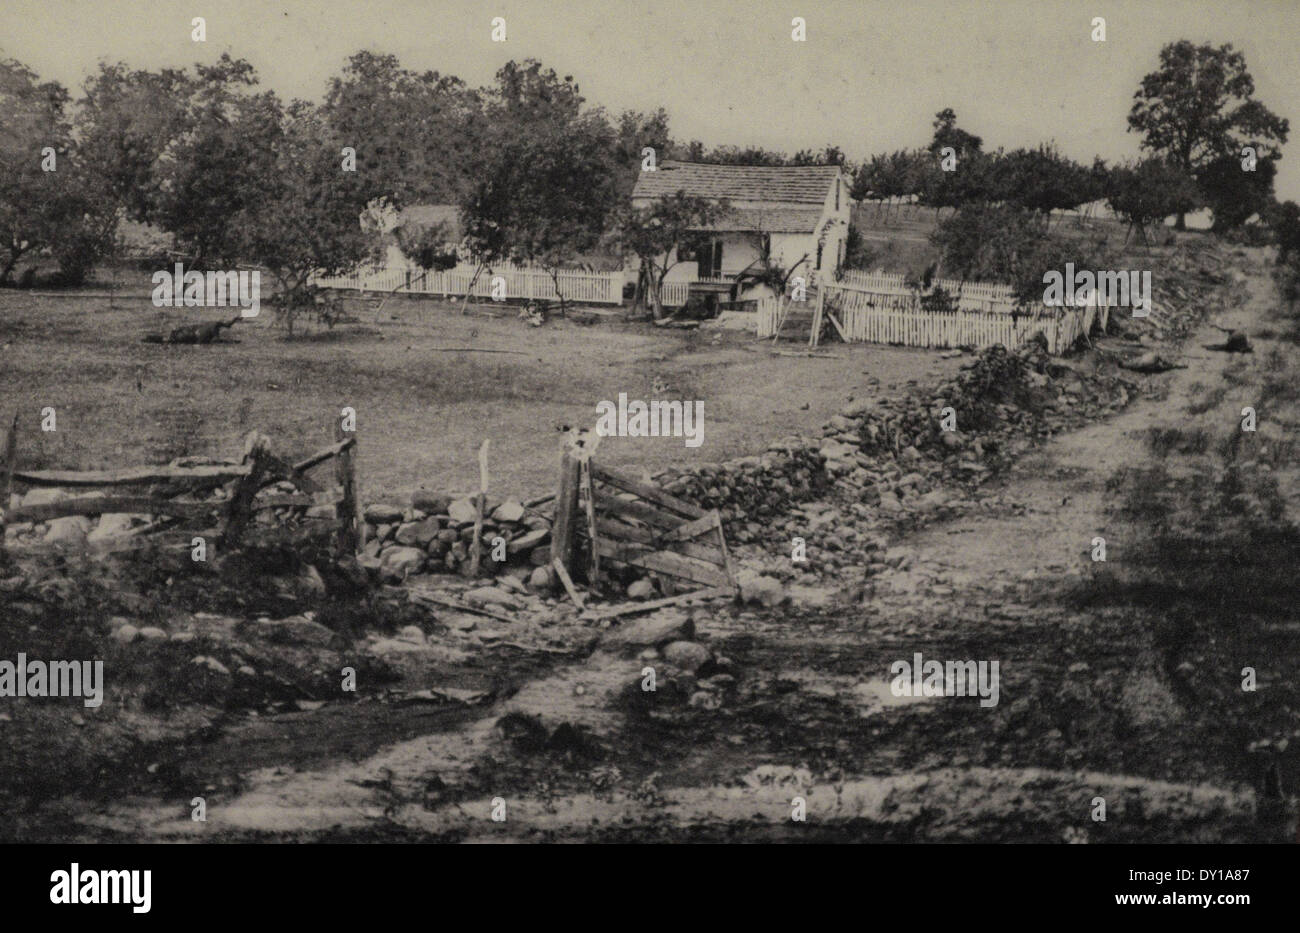 Lydia Leister's house on Taneytown road stands amid the debris of war after the battle of Gettysburg, July 1863 Stock Photo